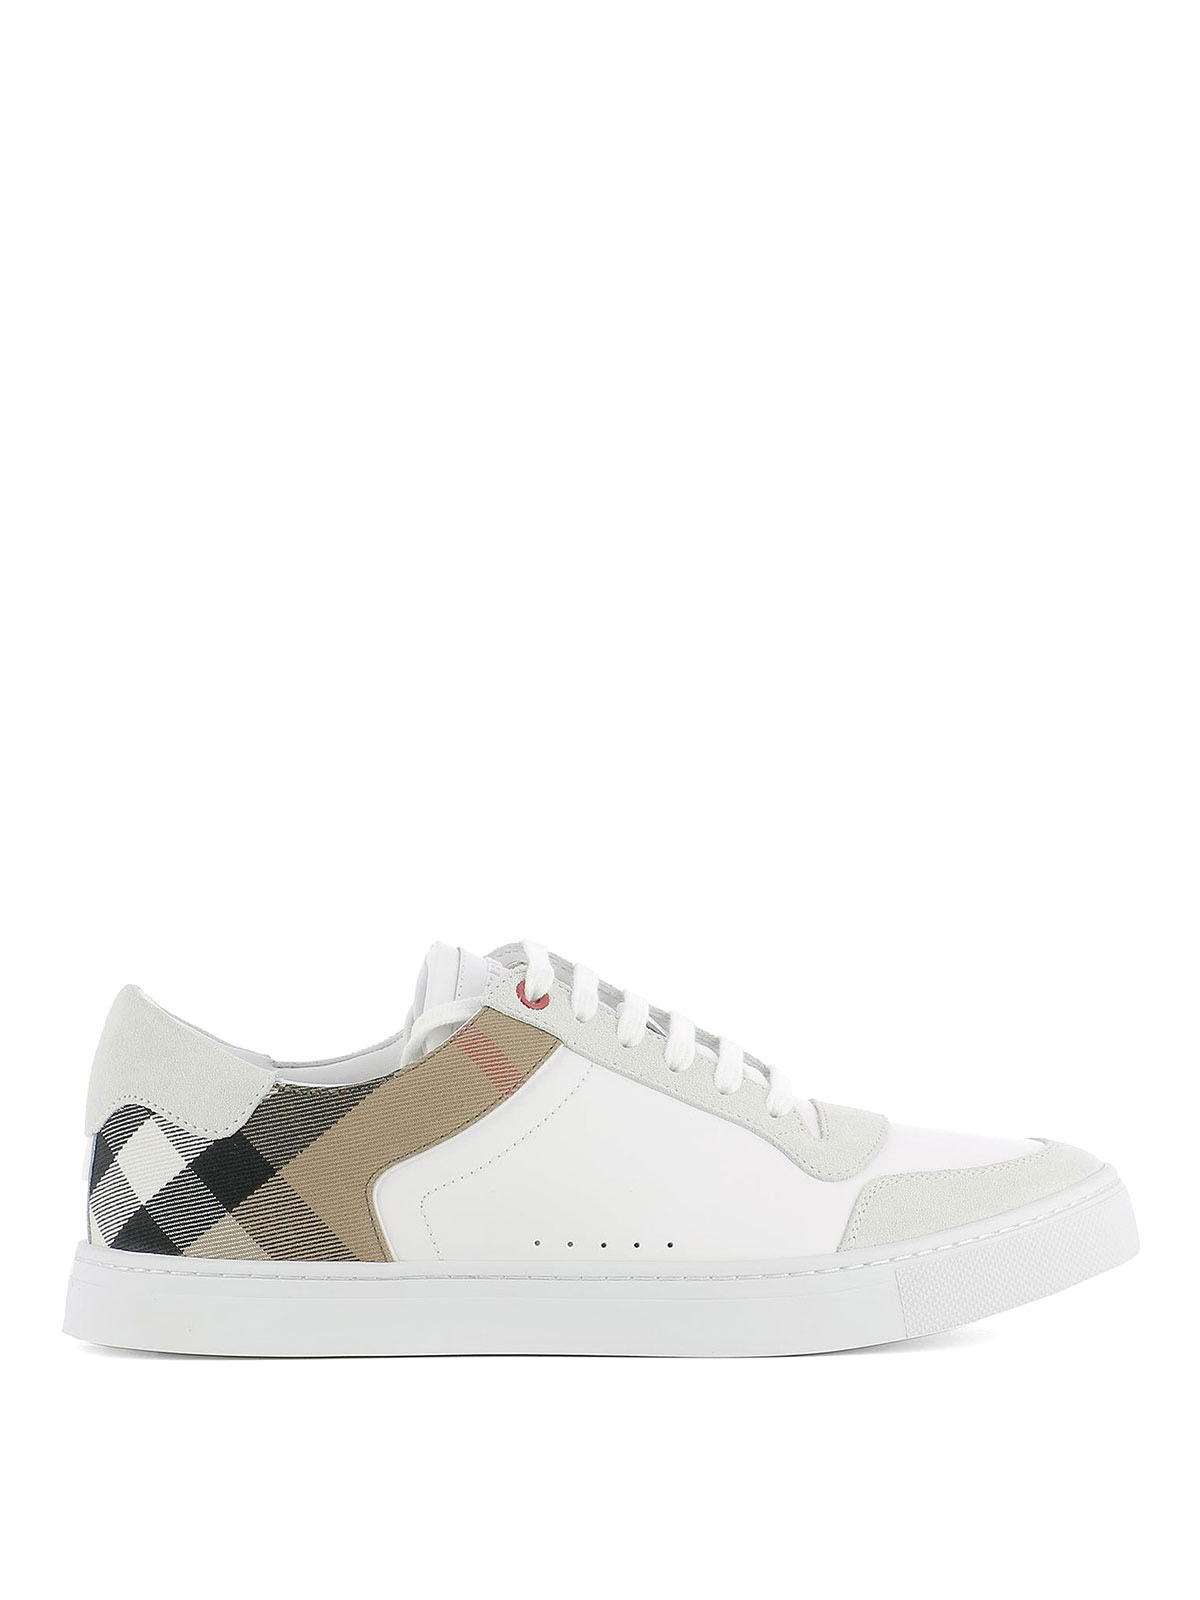 Burberry - Lace-up leather sneakers 